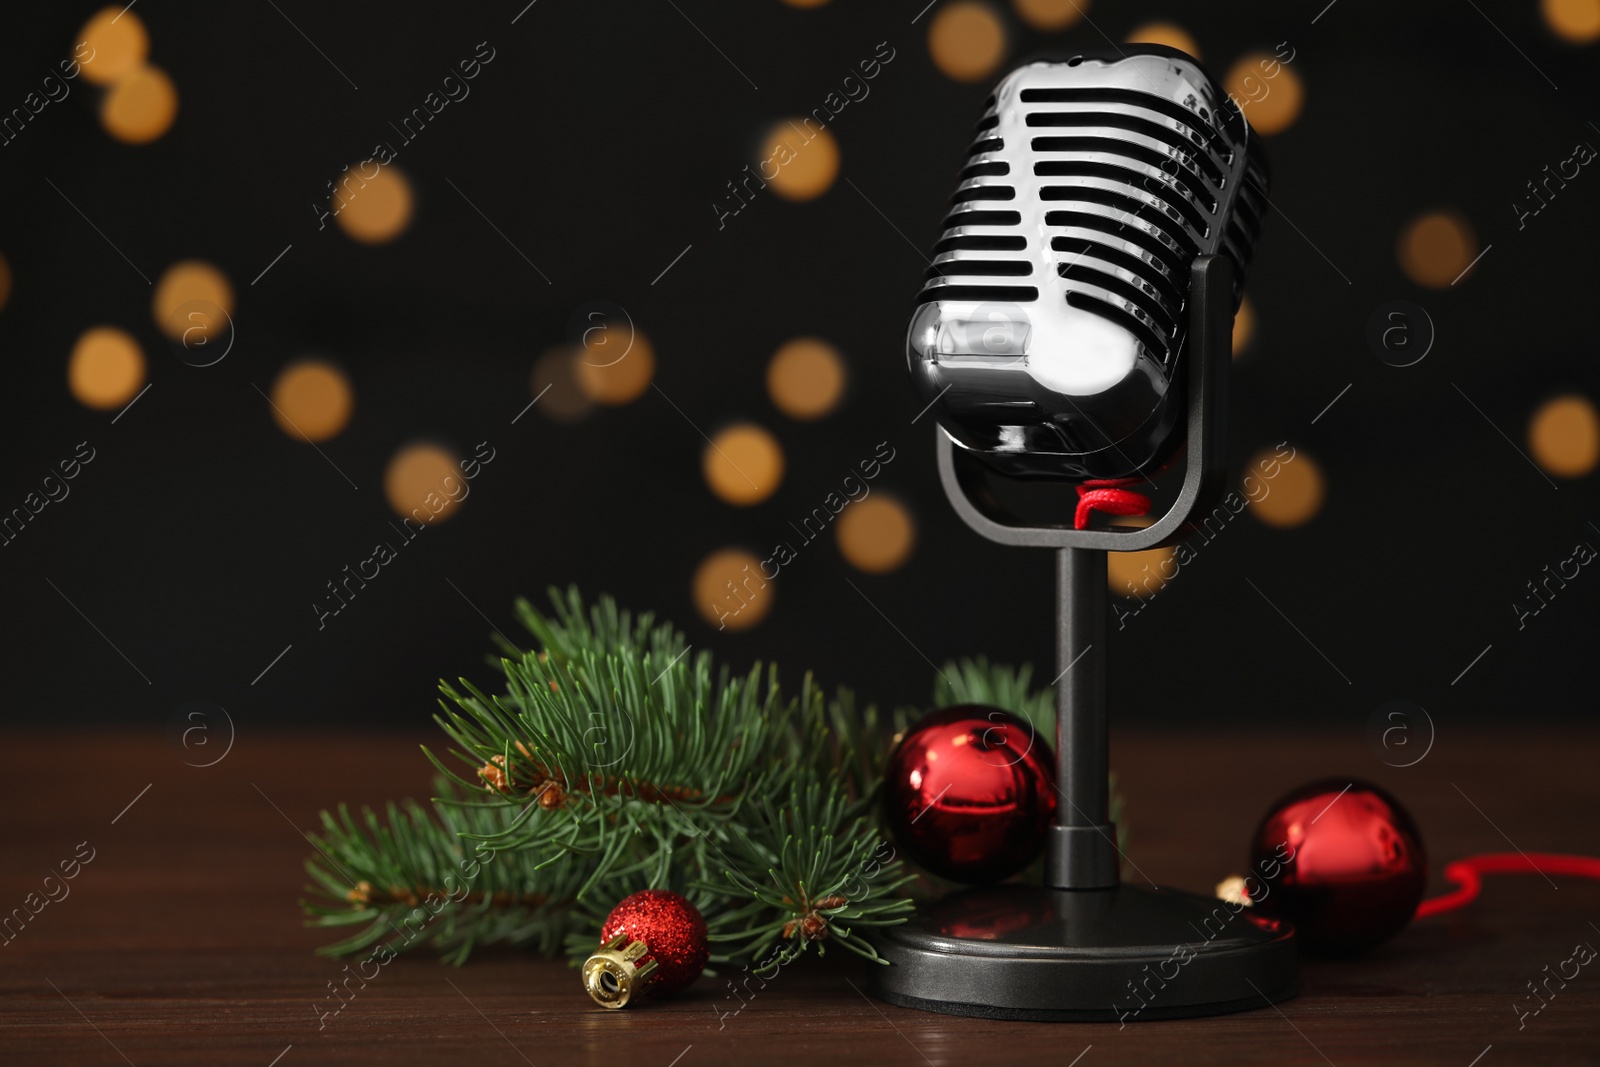 Photo of Retro microphone and festive decor on wooden table against blurred lights, space for text. Christmas music